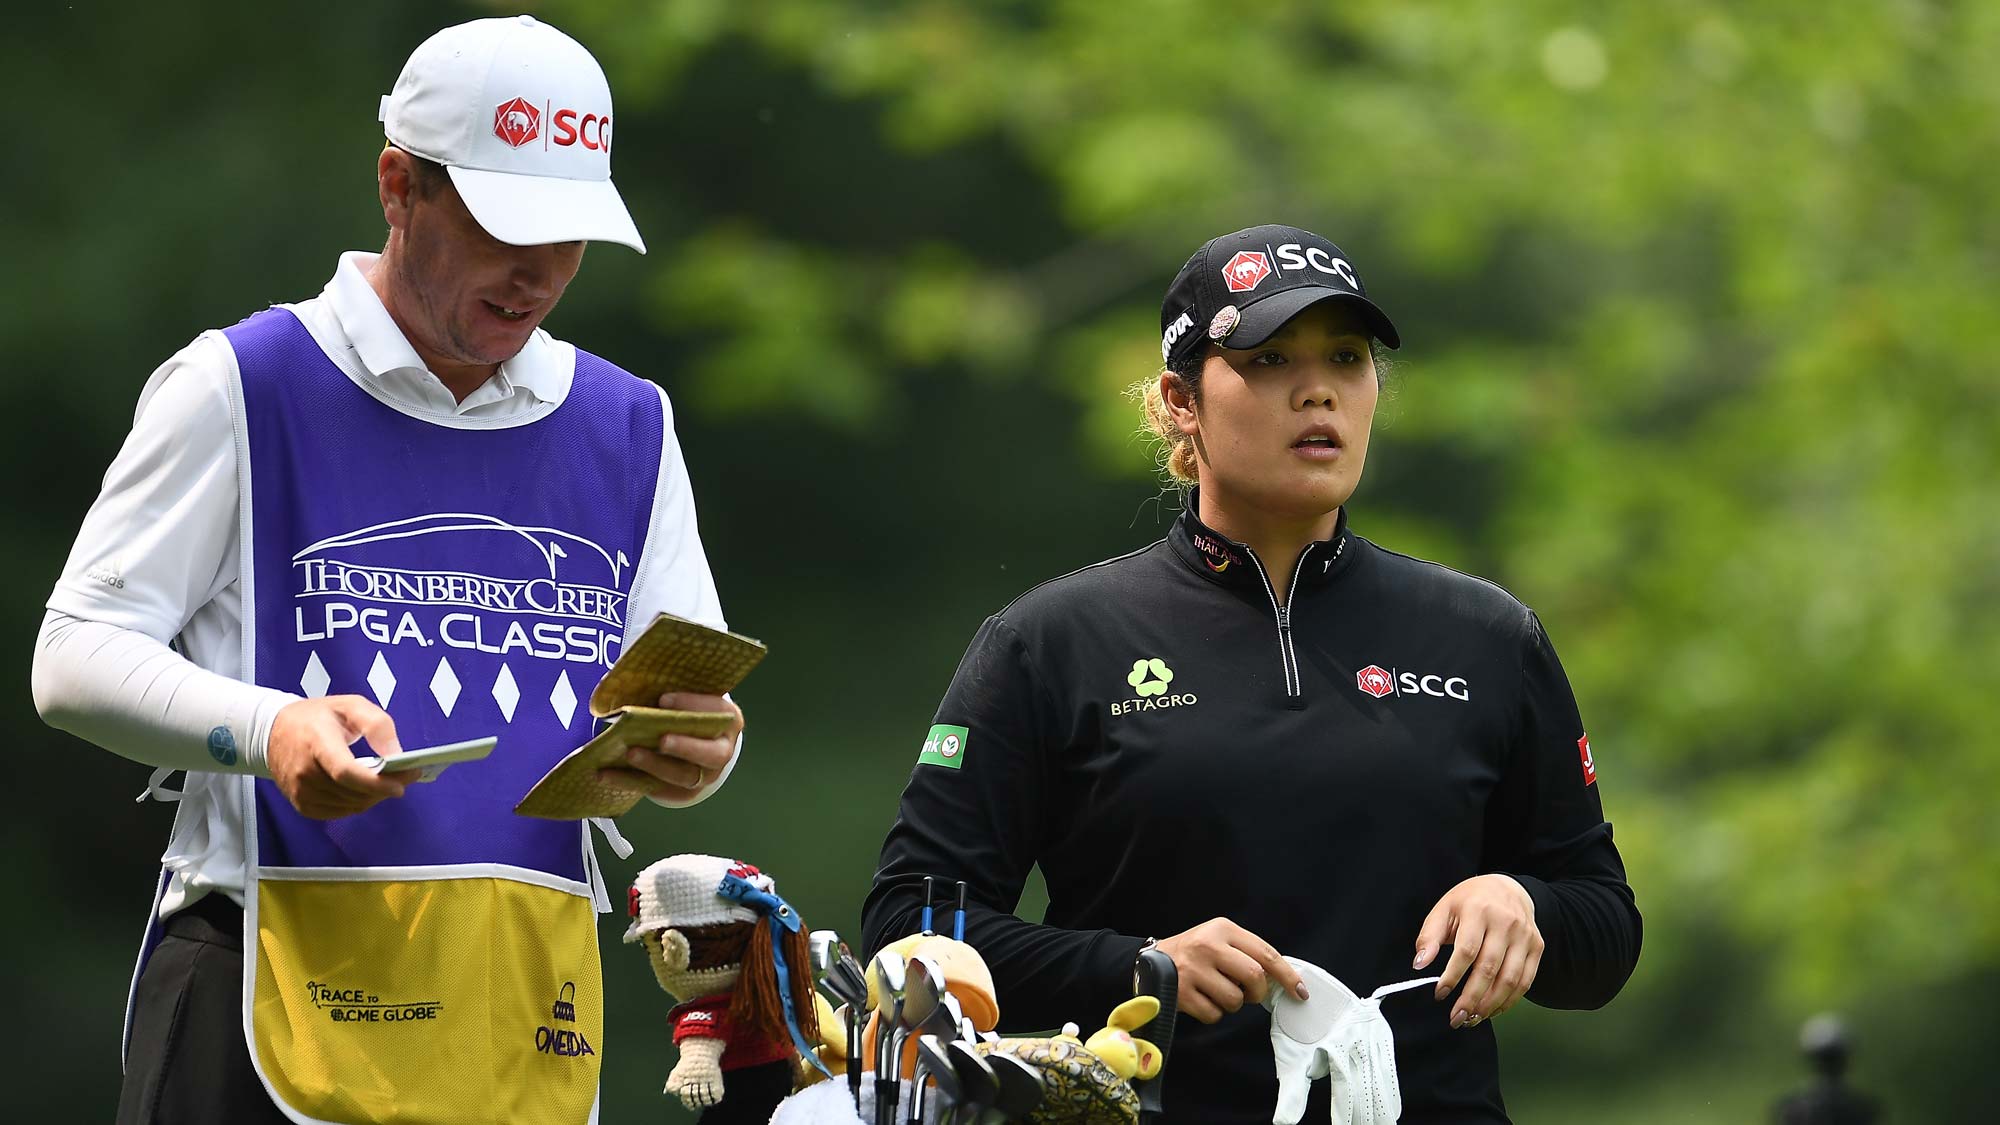 Ariya Jutanugarn of Thailand speaks with her caddie on the second tee during the final round of the Thornberry Creek LPGA Classic